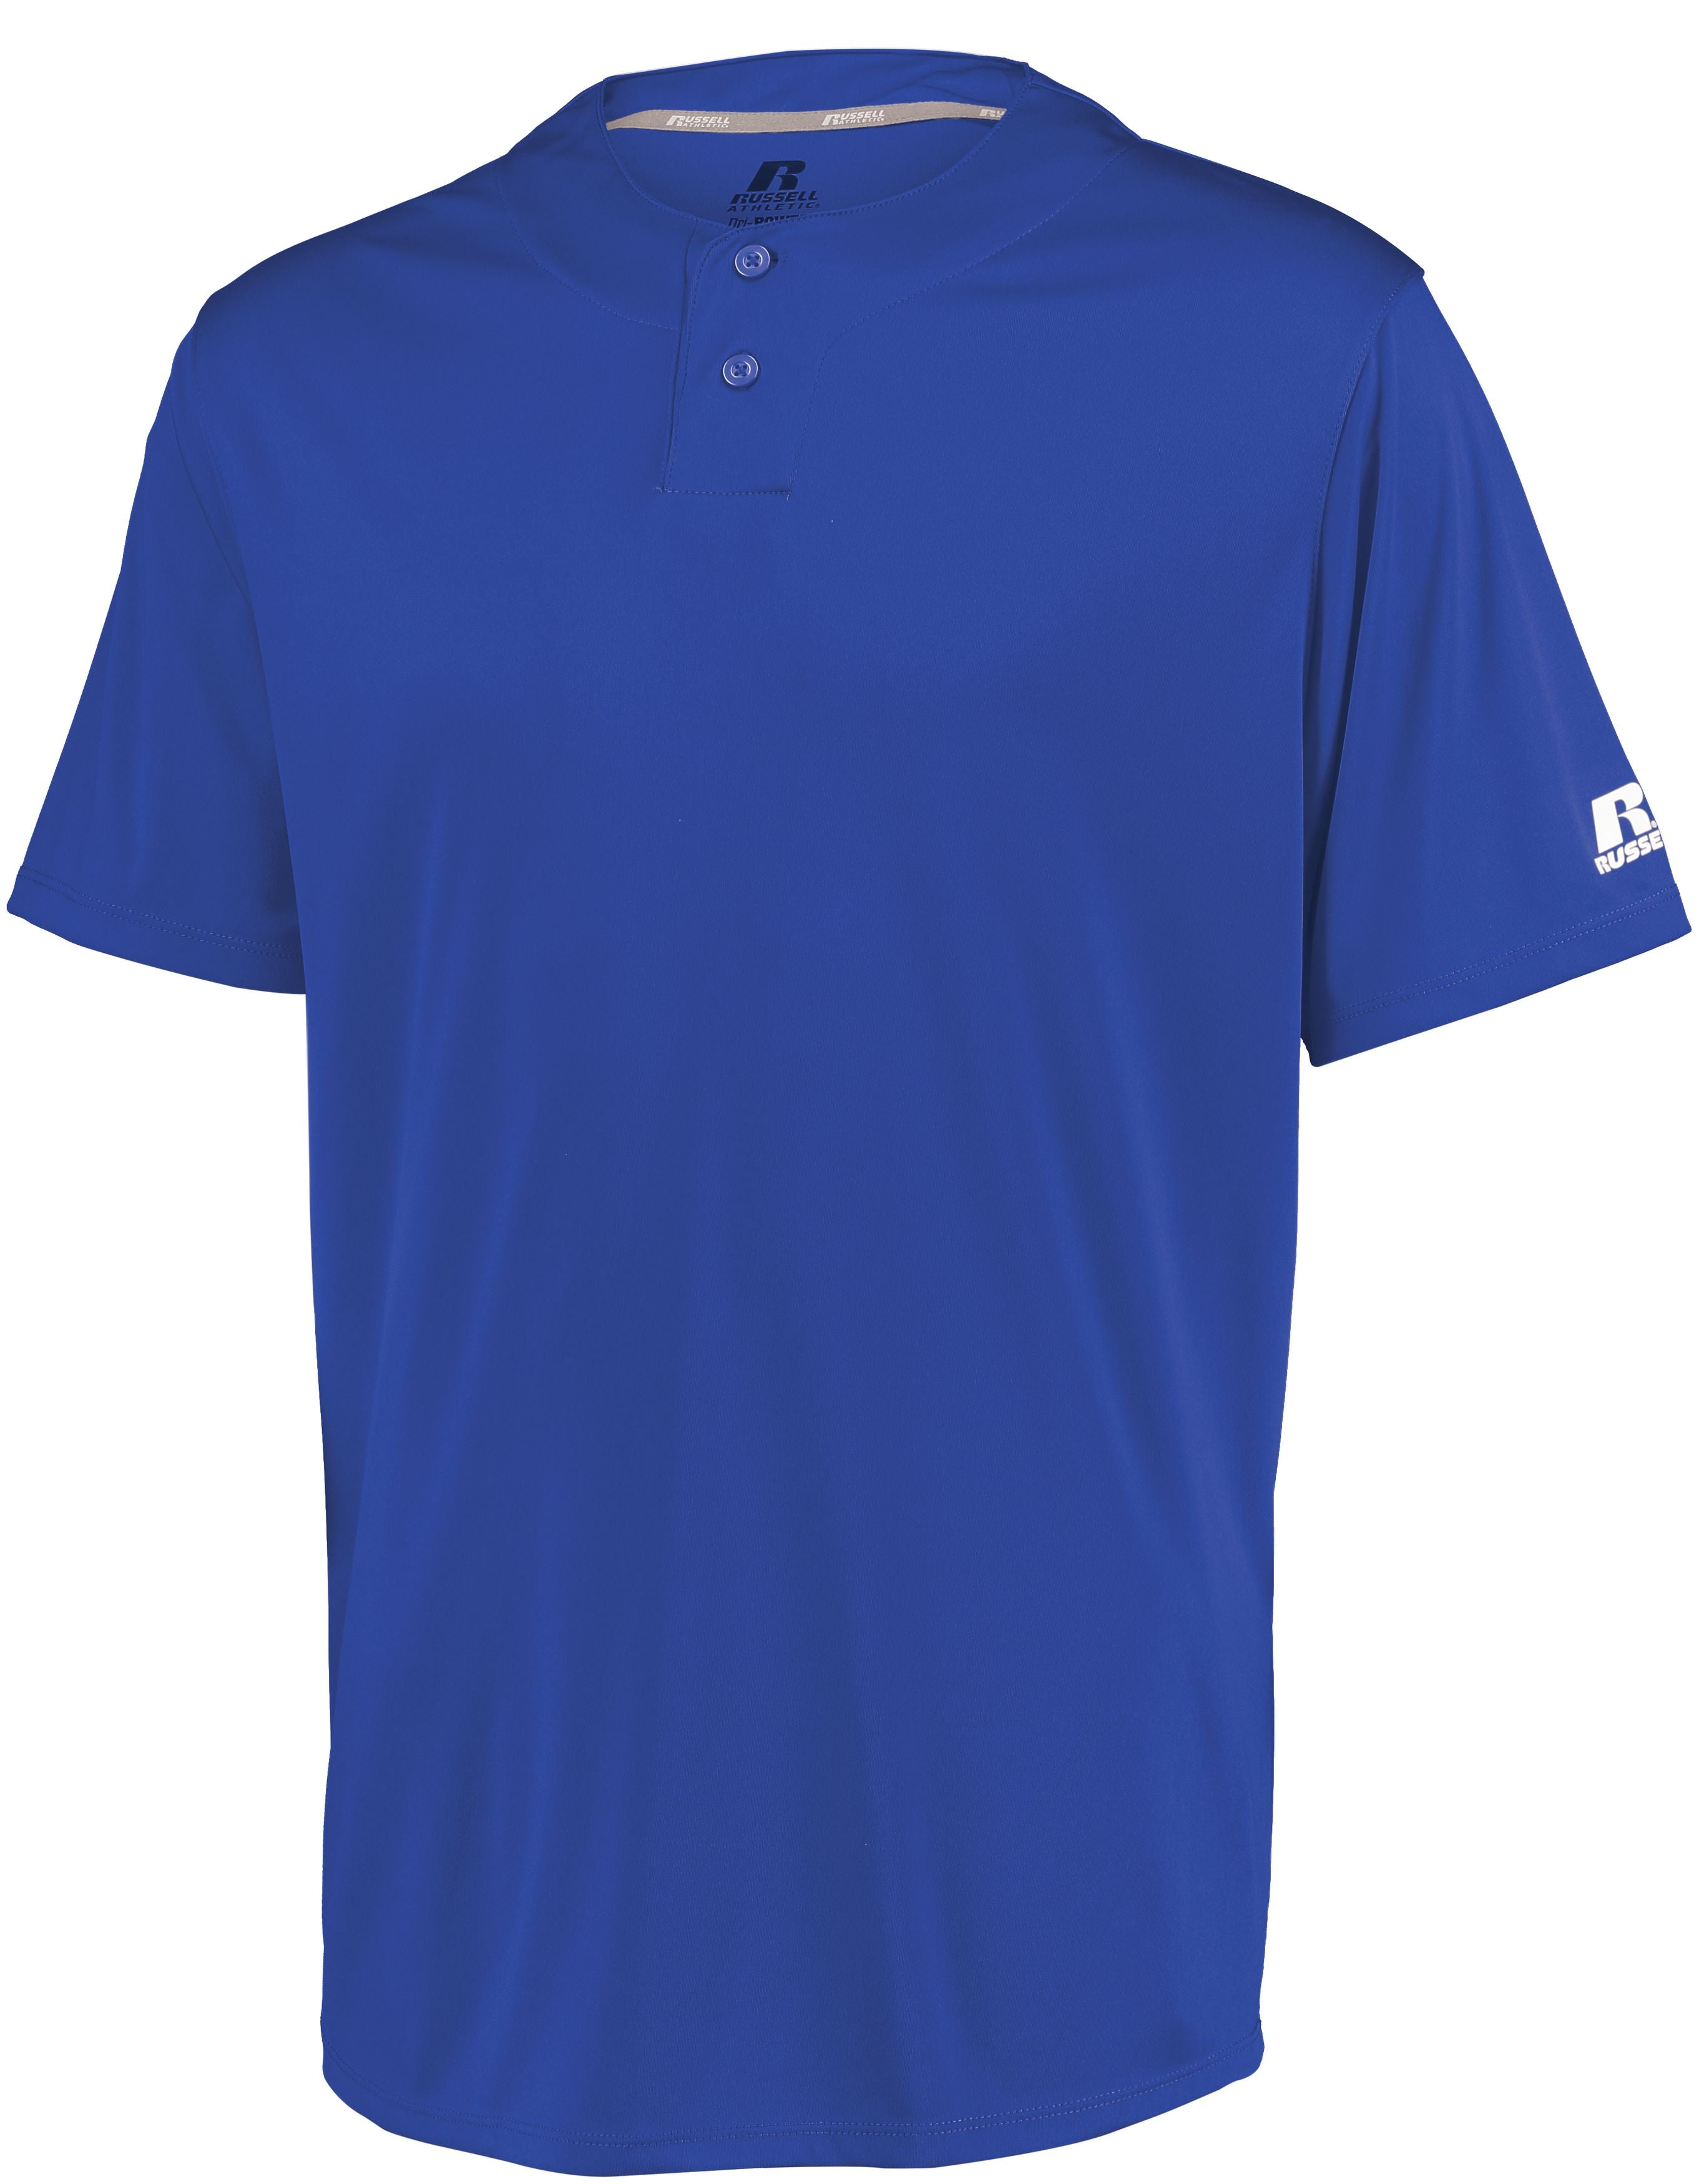 Russell Athletic Youth Performance Two-Button Solid Jersey in Royal  -Part of the Youth, Youth-Jersey, Baseball, Russell-Athletic-Products, Shirts, All-Sports, All-Sports-1 product lines at KanaleyCreations.com